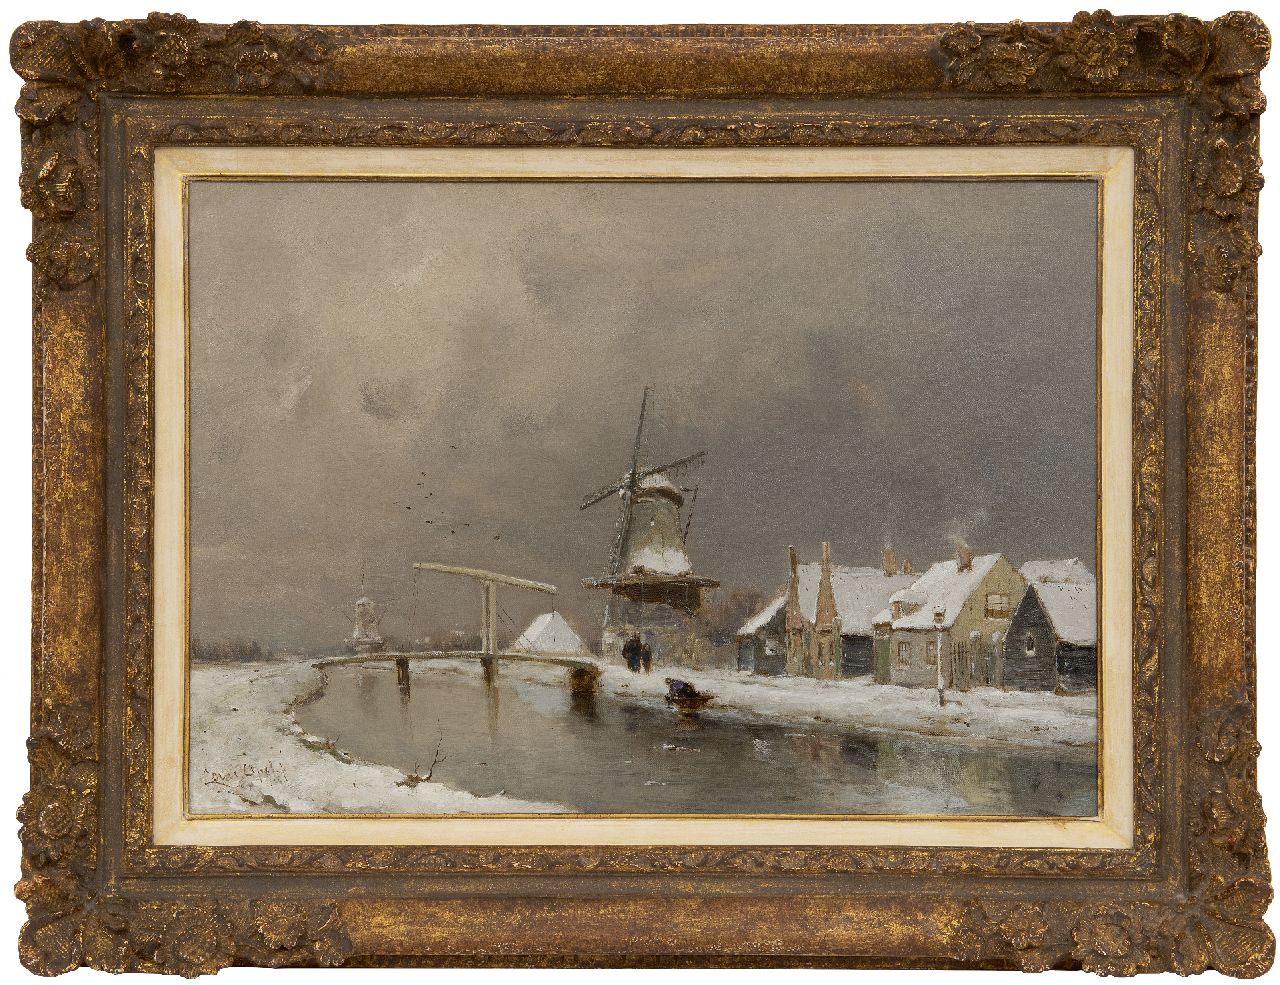 Apol L.F.H.  | Lodewijk Franciscus Hendrik 'Louis' Apol | Paintings offered for sale | Winter view of a village by a river, oil on canvas 35.3 x 50.2 cm, signed l.l.